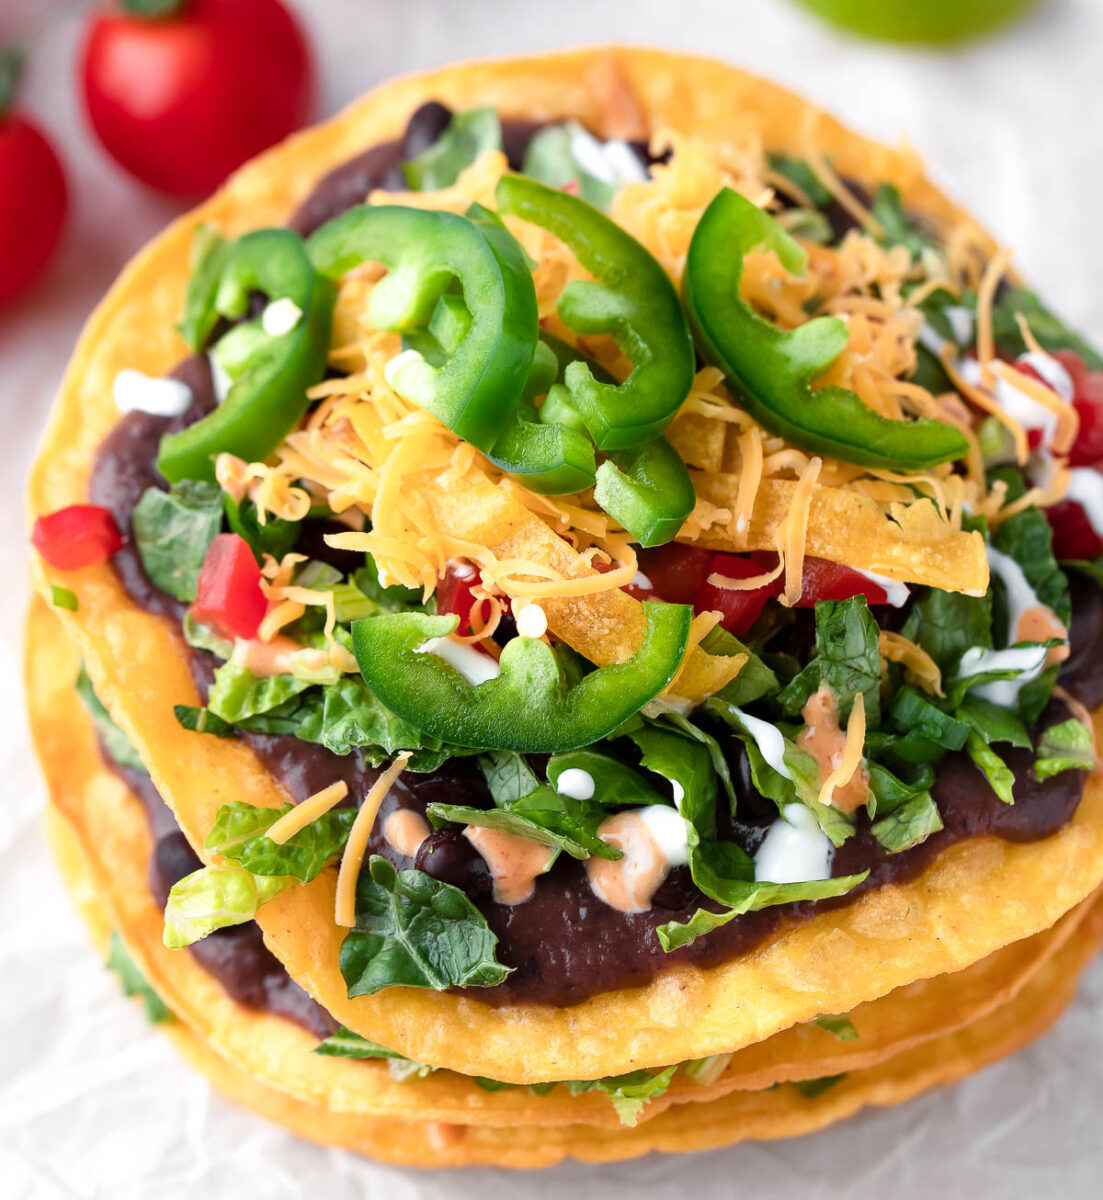 Tostadas with Black Beans and Taco Toppings